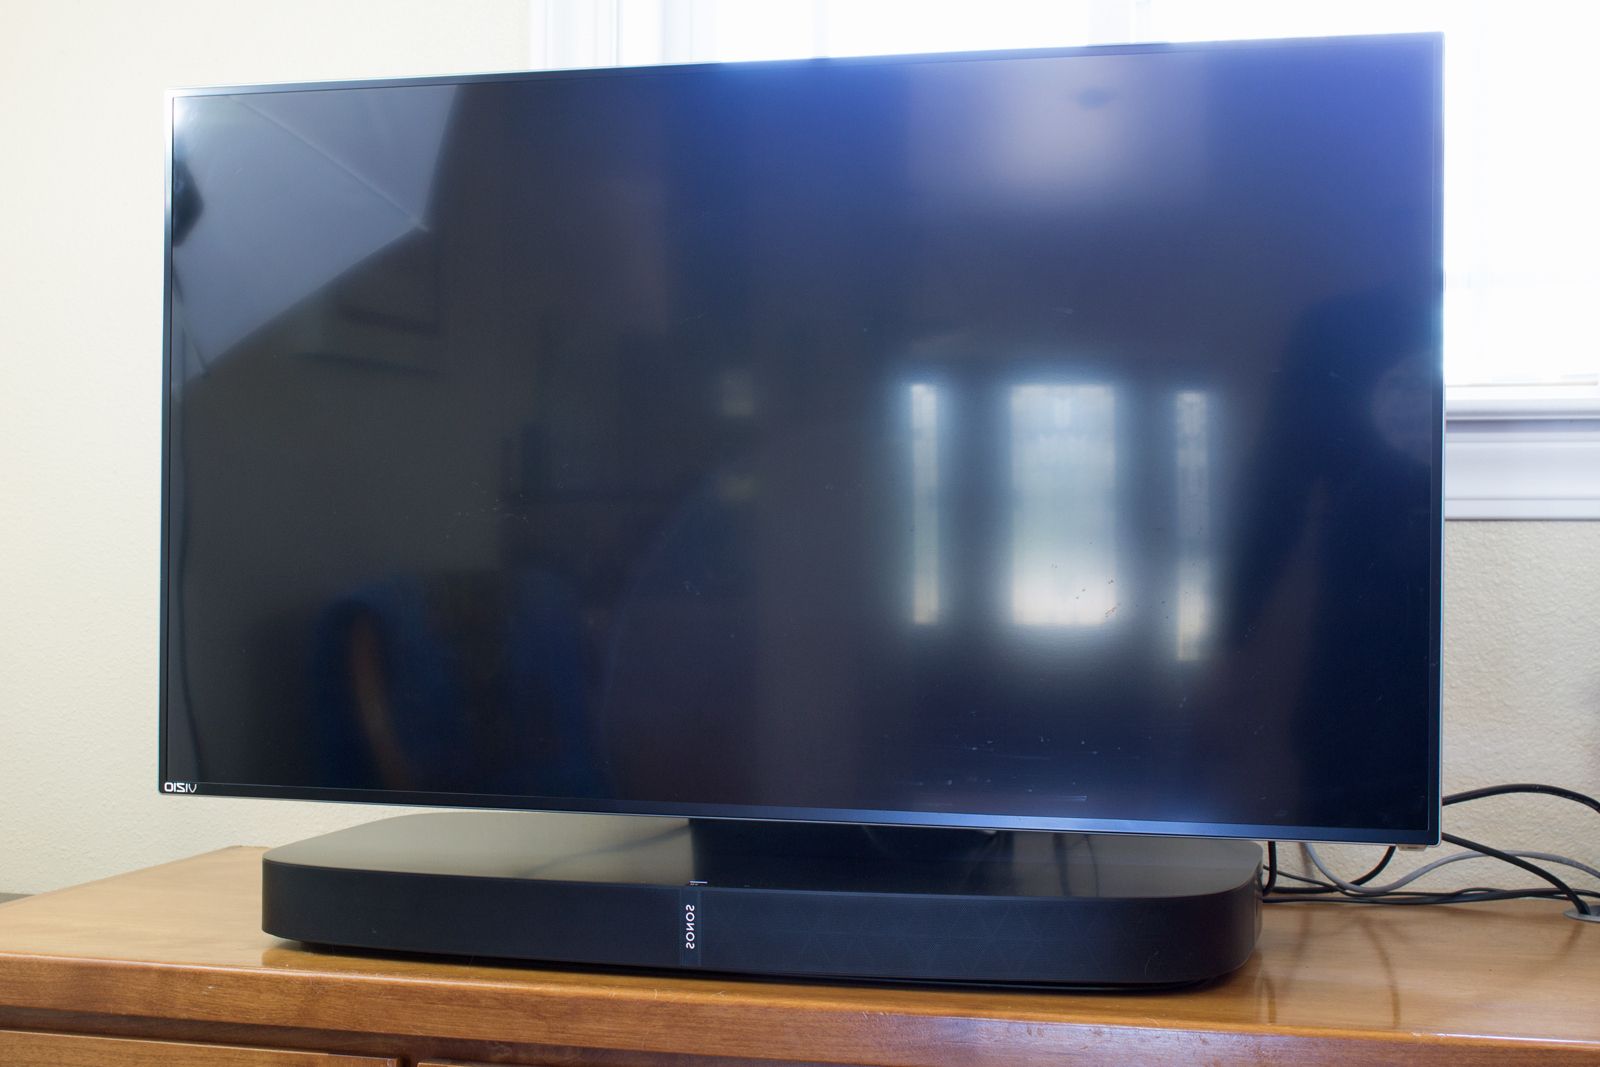 Widely Used Sonos Tv Stands Within Sanus Swiveling Tv Base For Playbase Review: The Perfect Sonos (View 20 of 20)